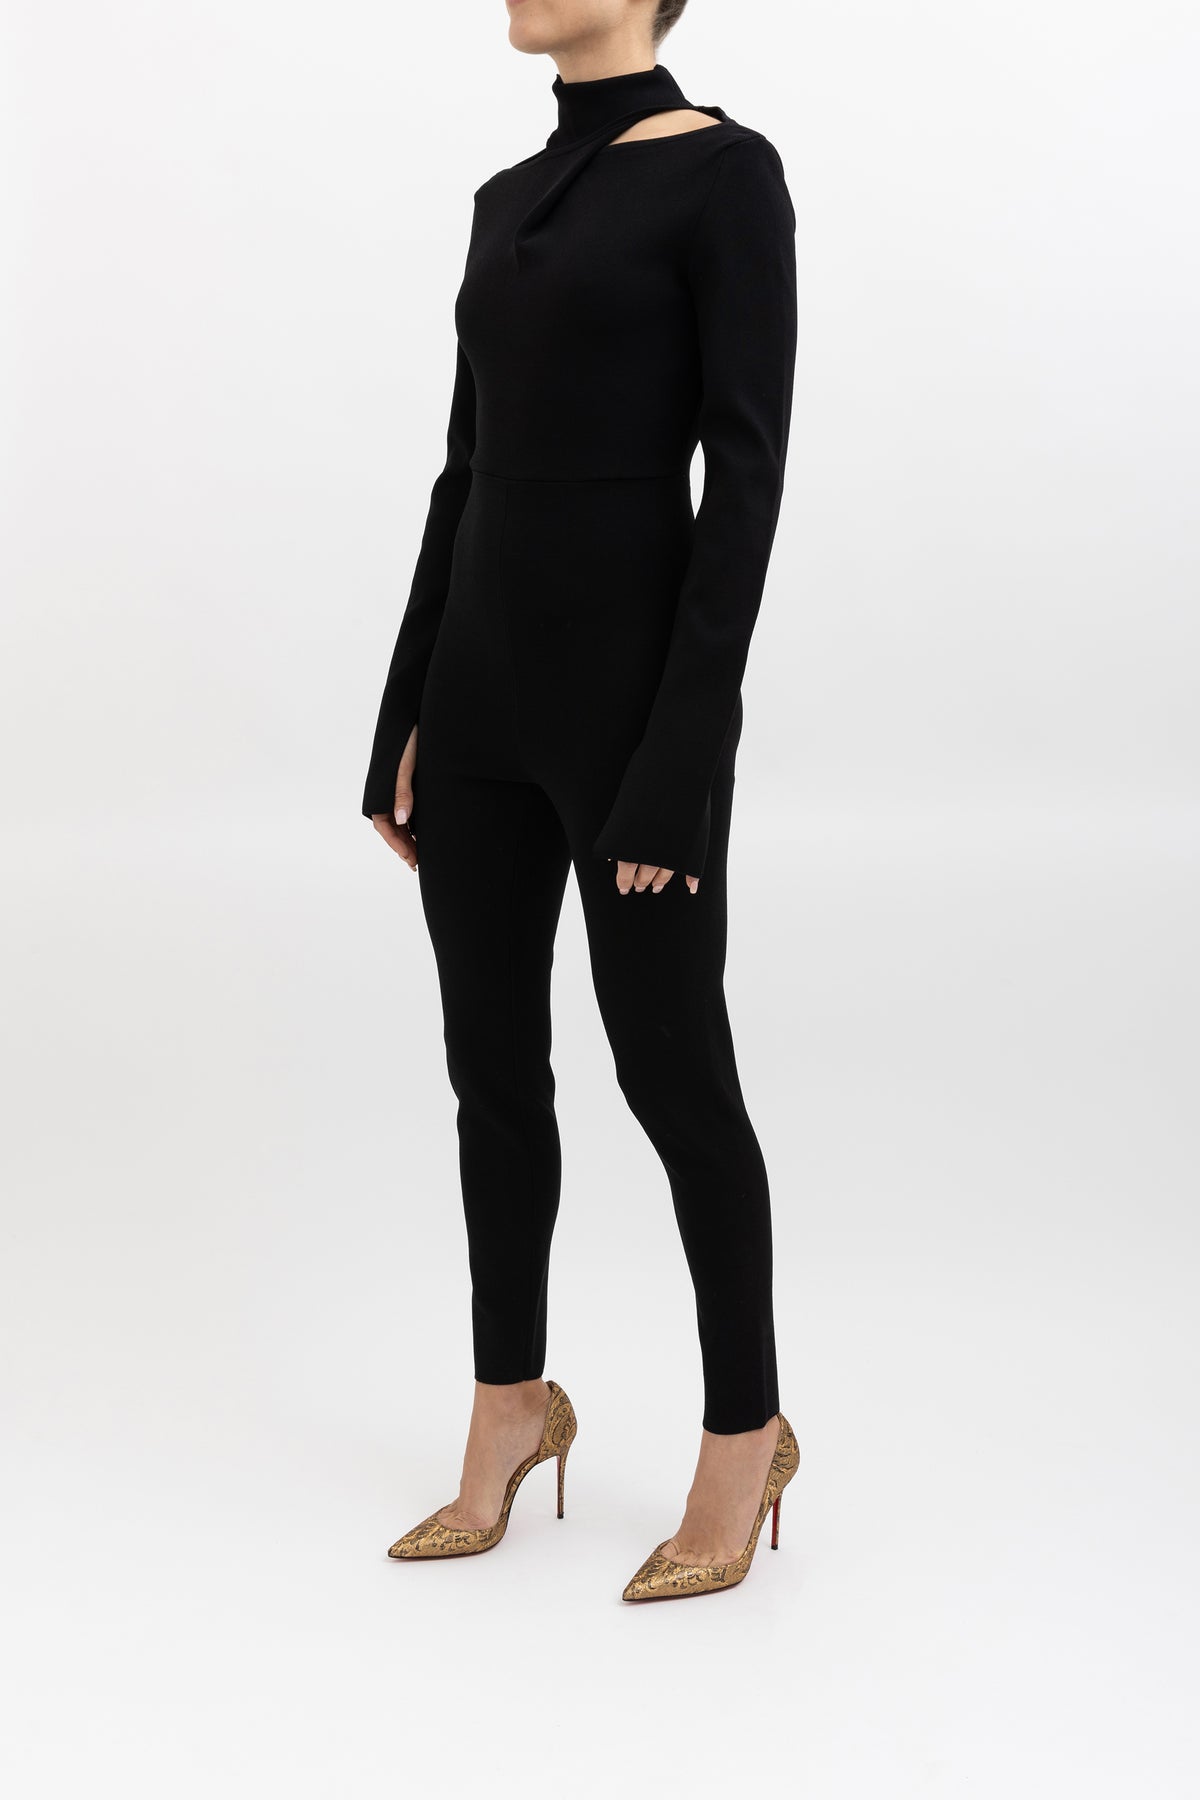 Coco Knit Catsuit